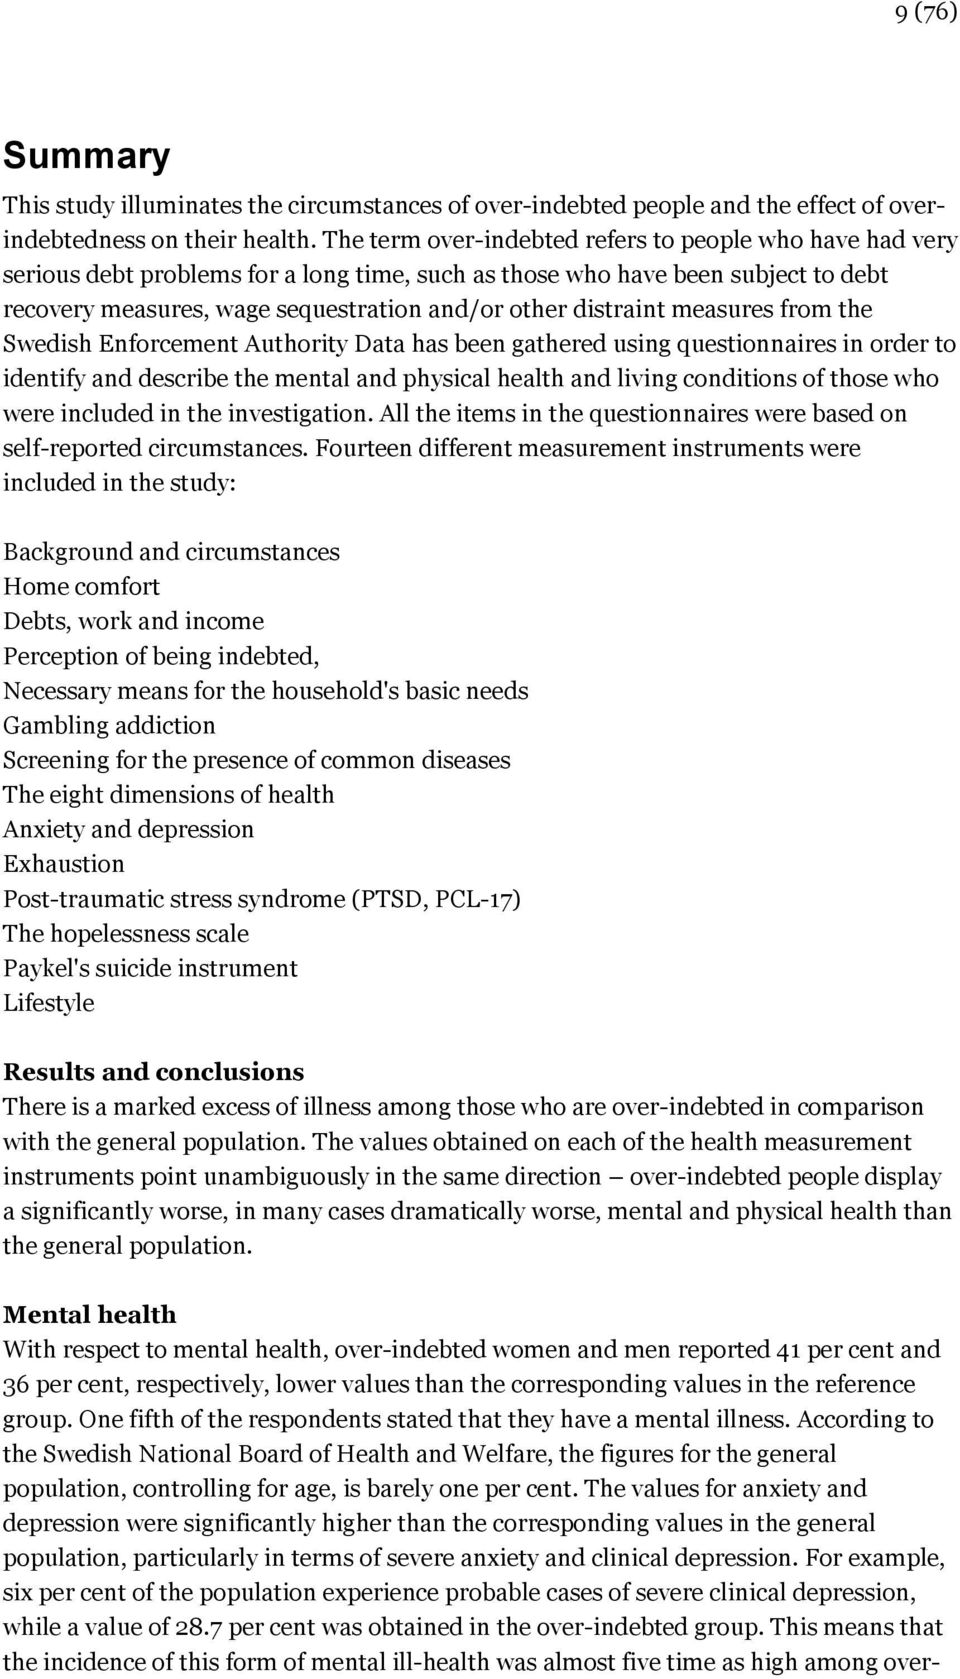 distraint measures from the Swedish Enforcement Authority Data has been gathered using questionnaires in order to identify and describe the mental and physical health and living conditions of those